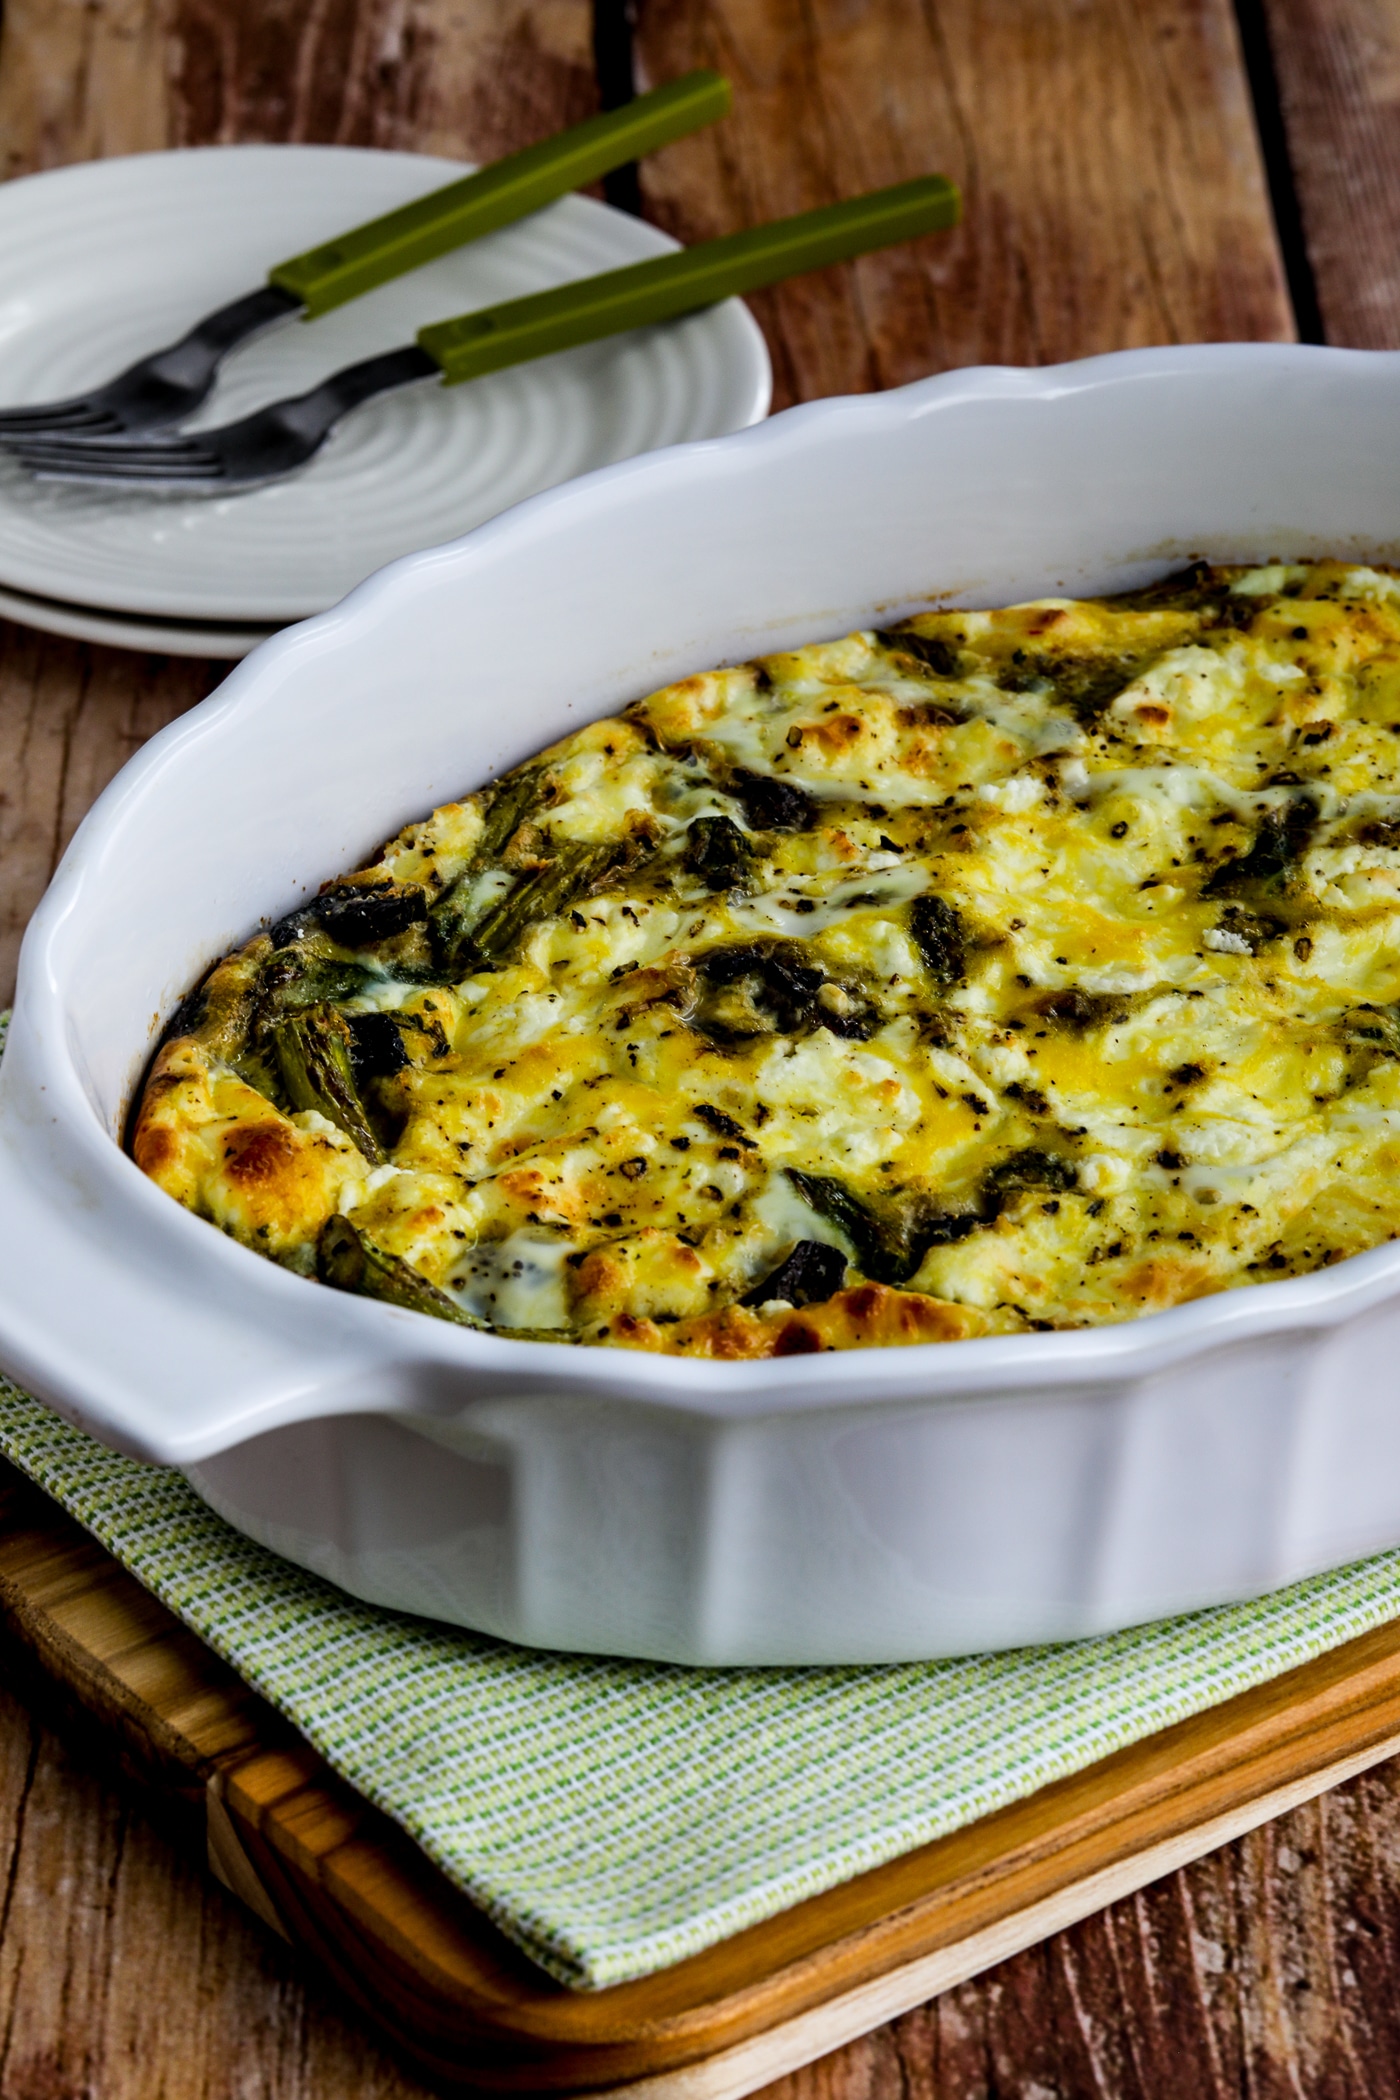 Asparagus, Mushroom, and Goat Cheese Breakfast Casserole in baking dish shown on napkin with plates, forks